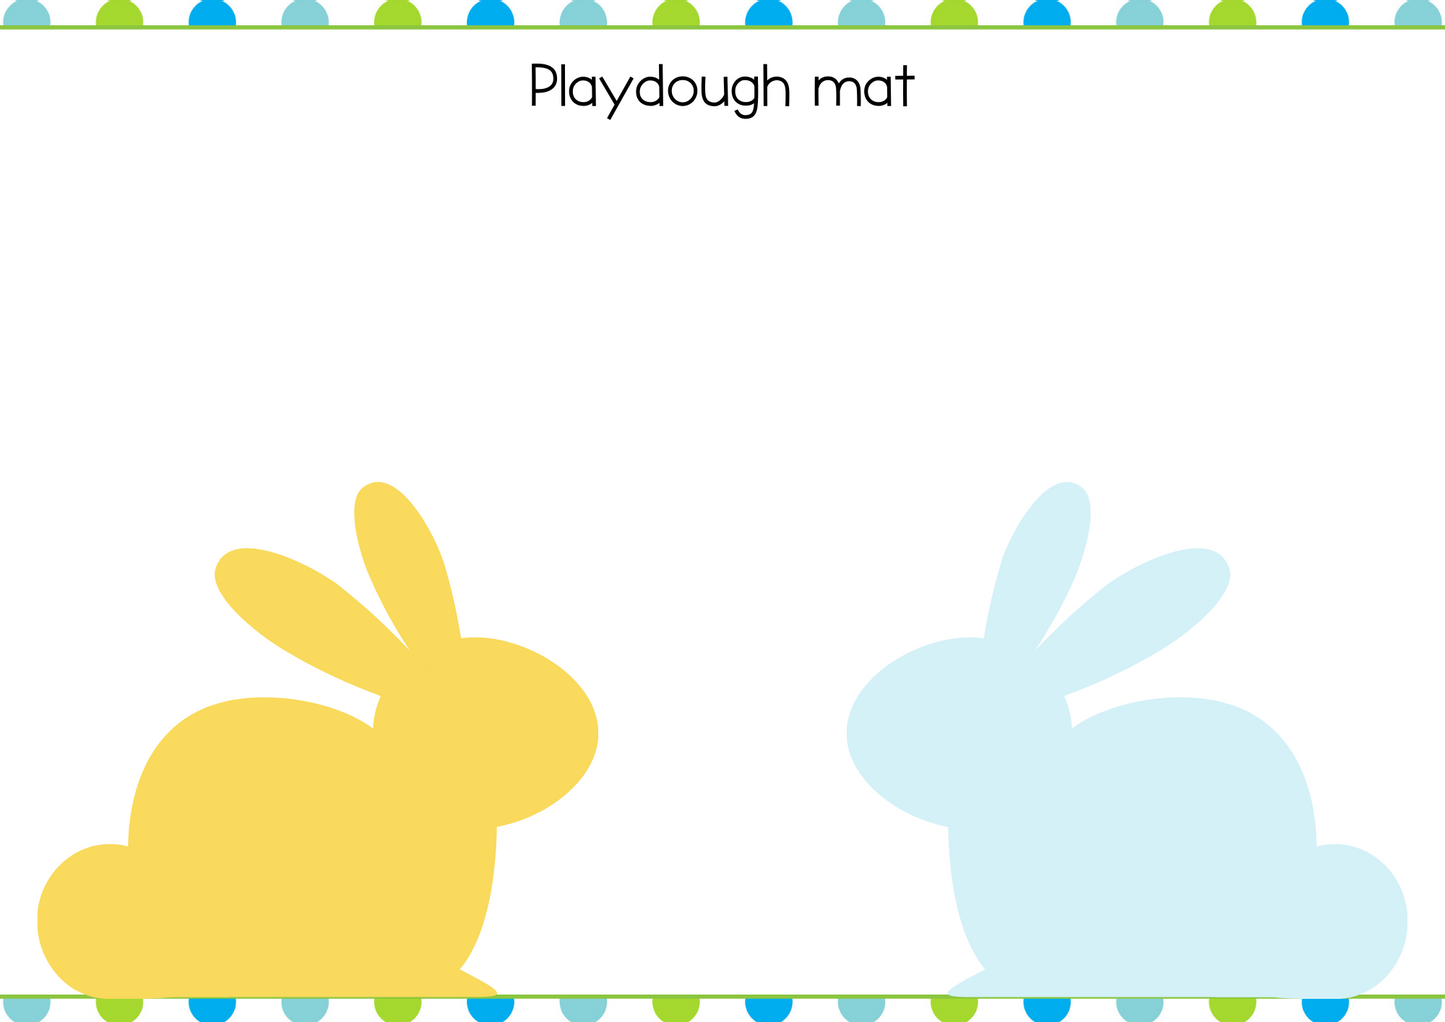 Spring Busy Book for Preschoolers (48 Pages)